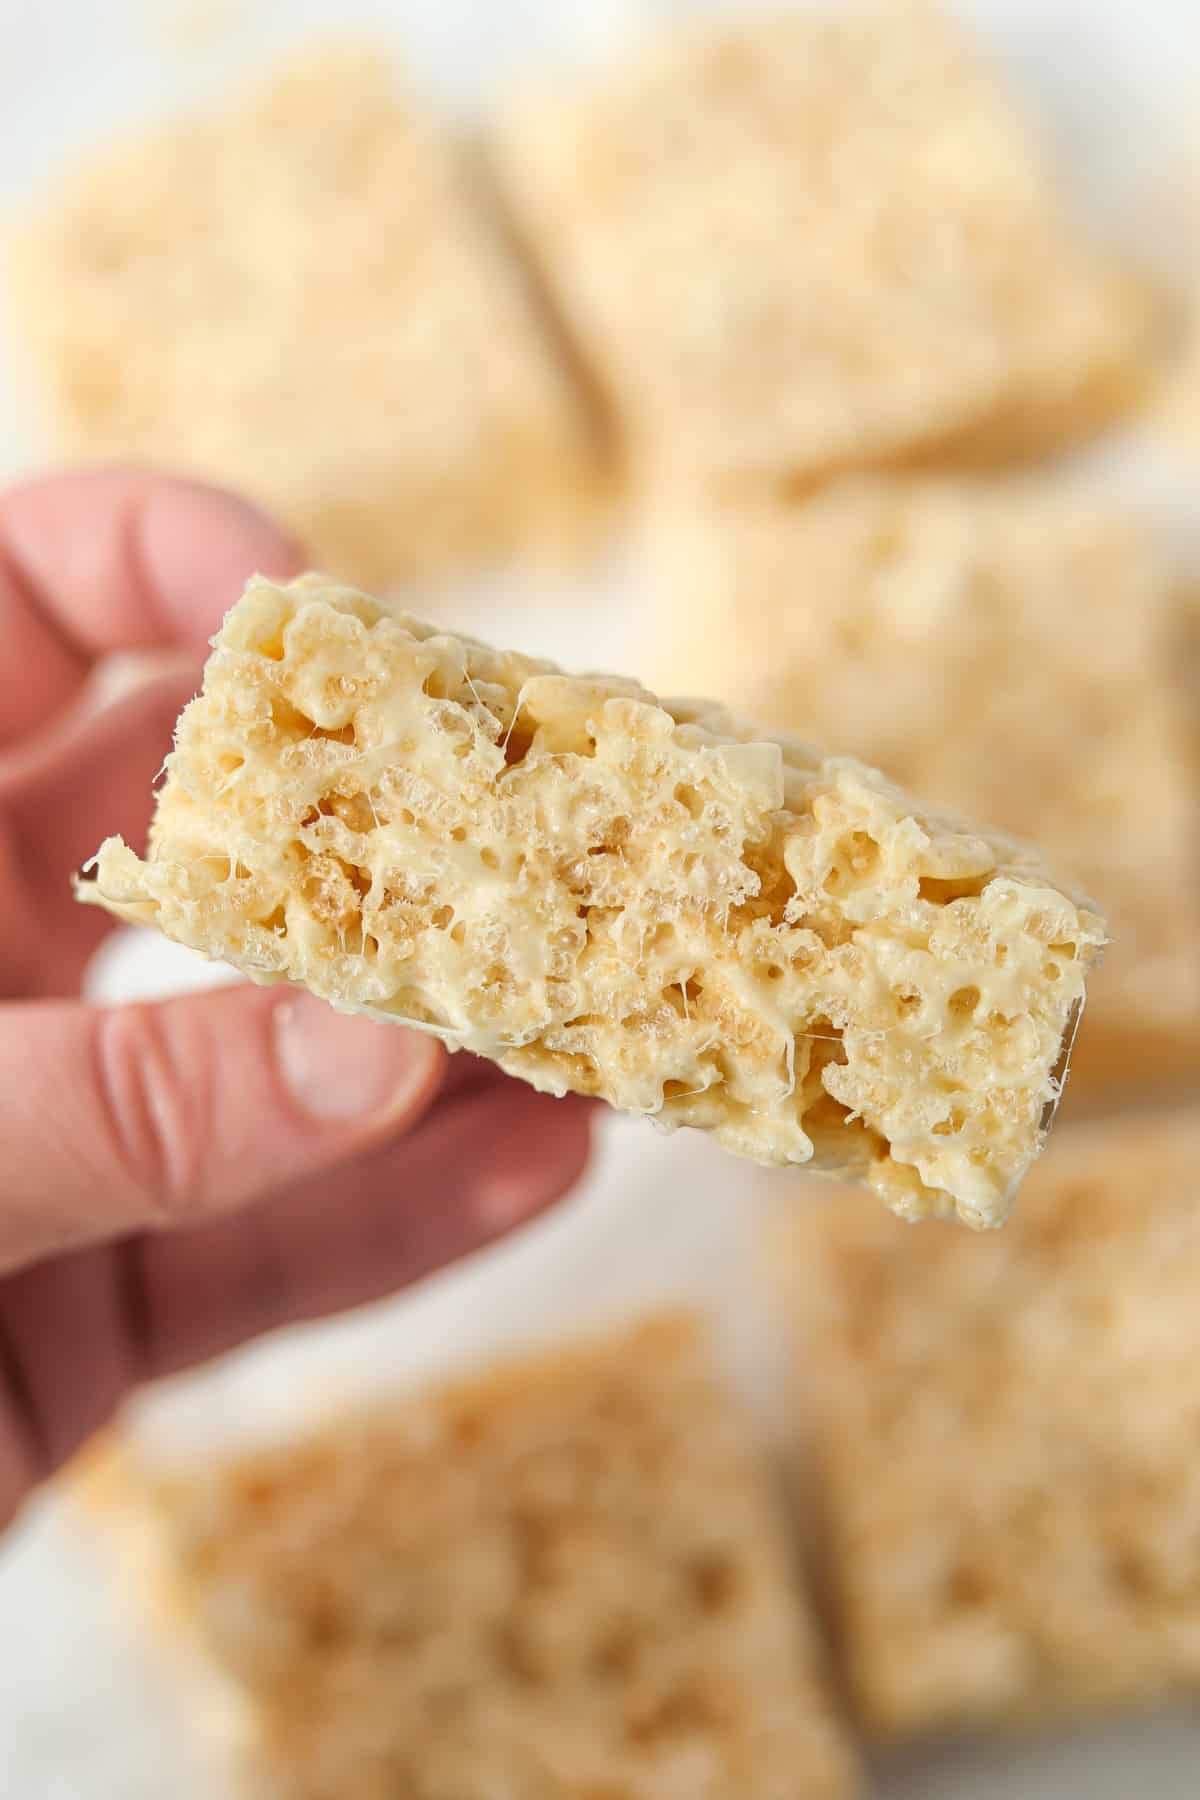 Holding up a rice krispie treat to show the texture.